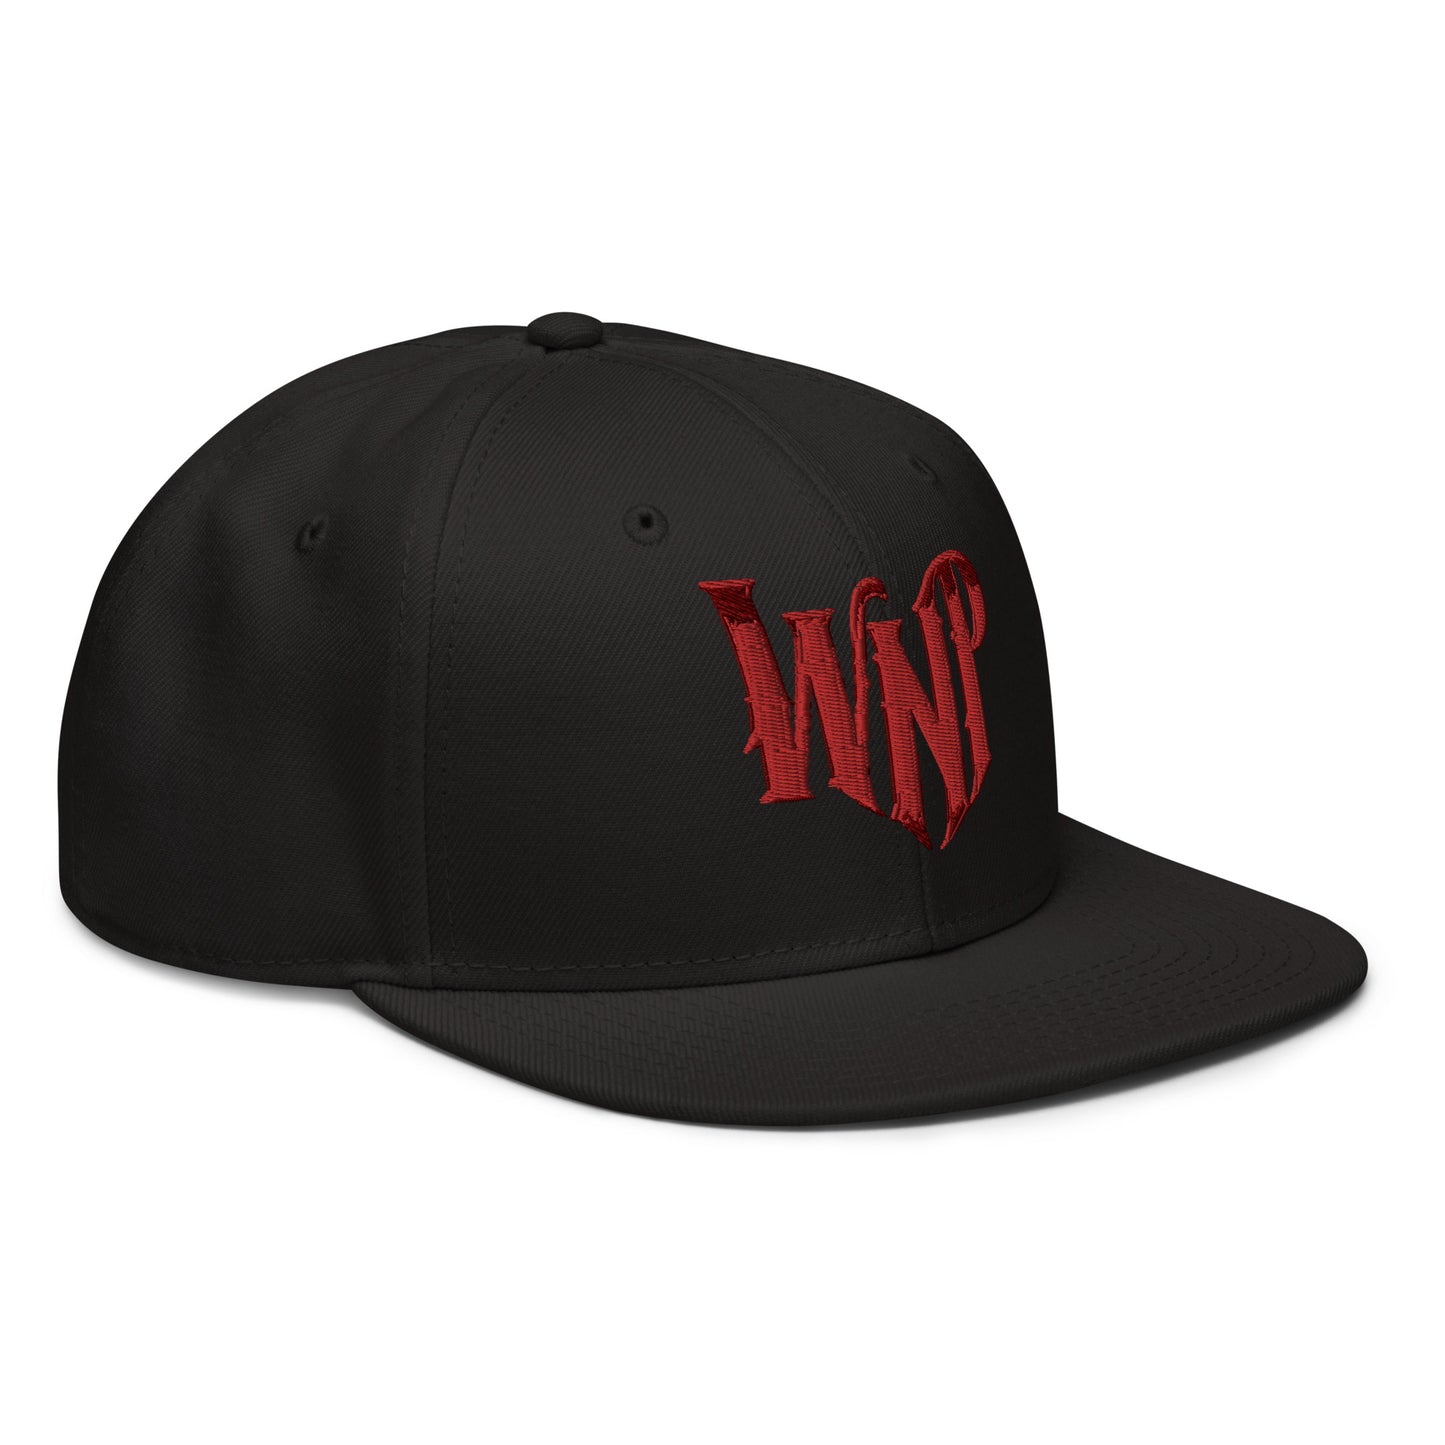 Willy Northpole Embroidered Snapback